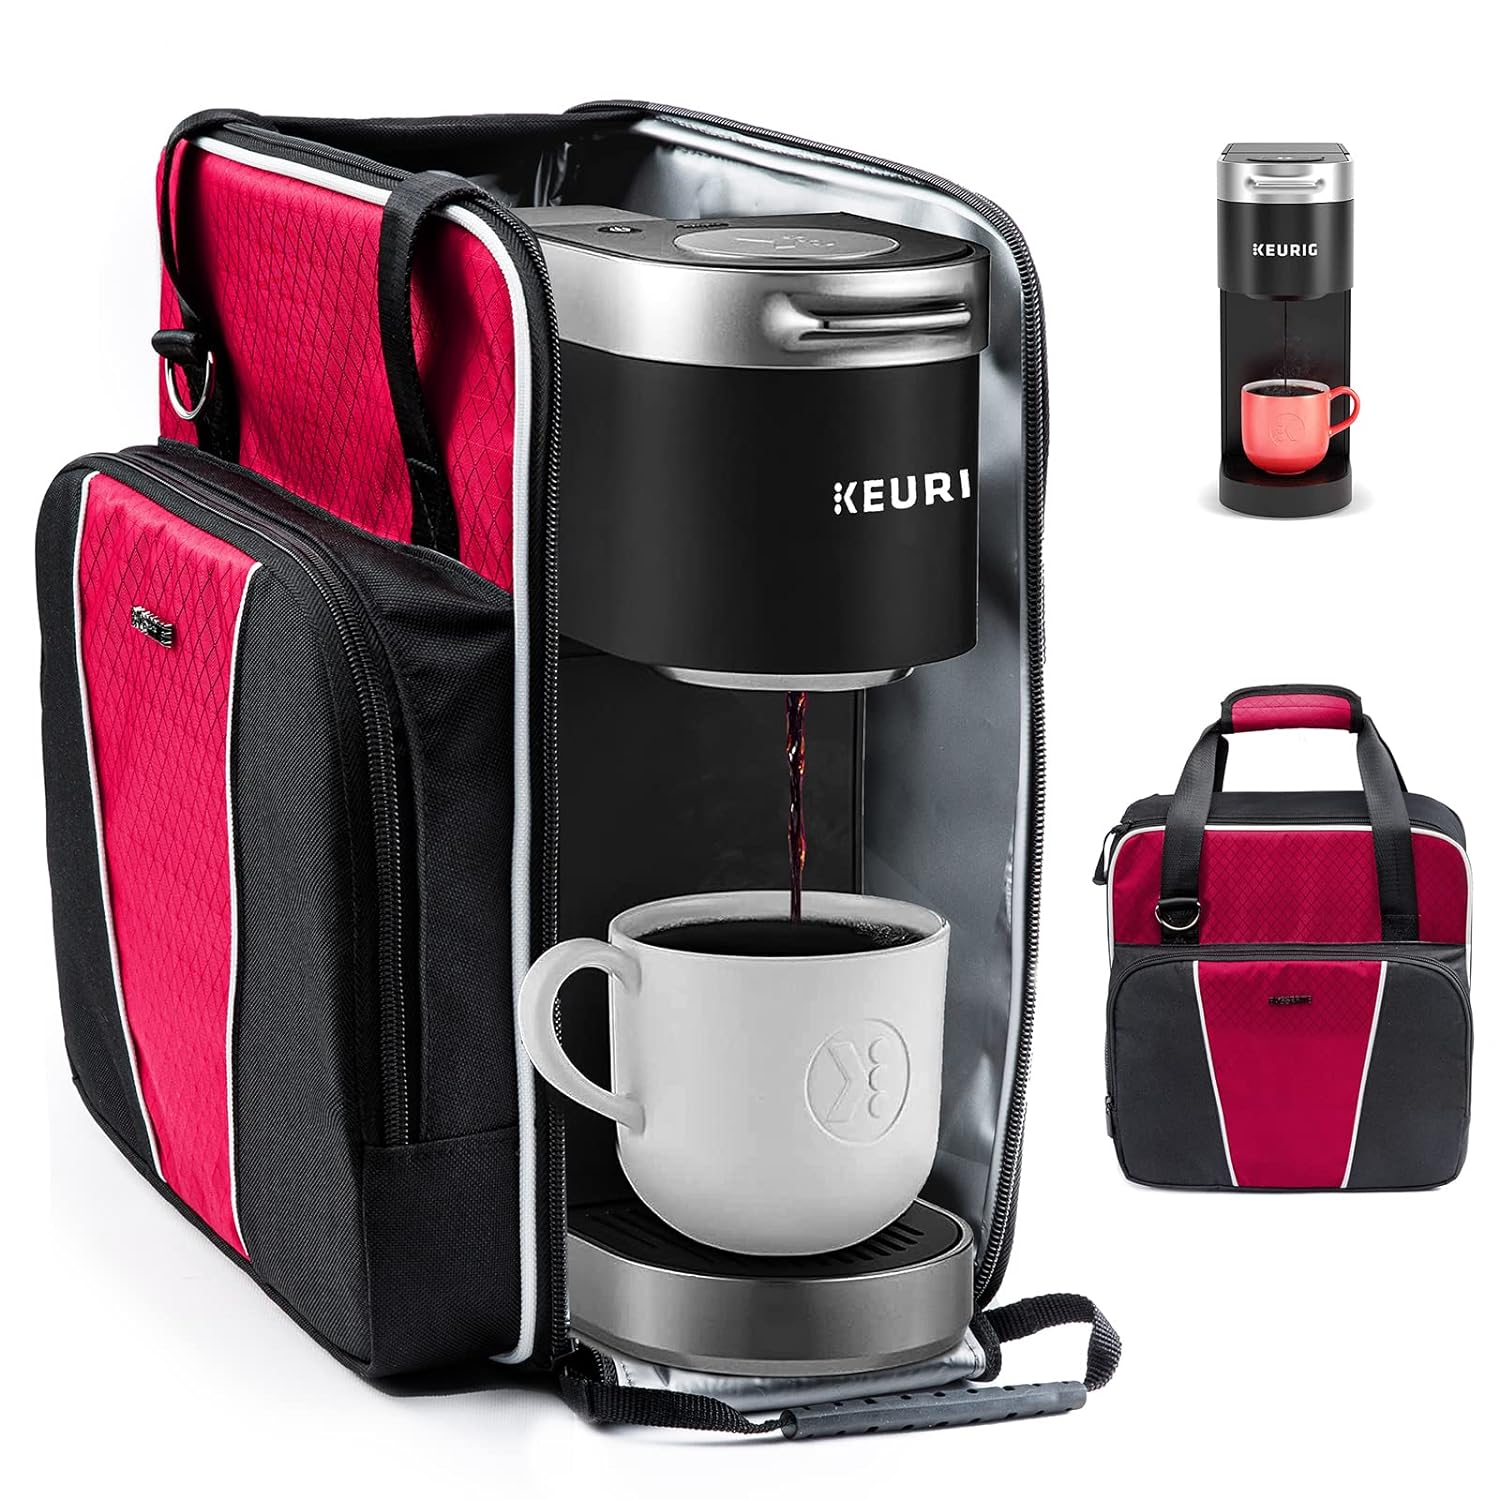 Great Choice Products Coffee Maker Travel Bag Compatible With Keurig KMini Or KMini Plus, Single Serve Coffee Brewer Carrying Case With Multiple Po…